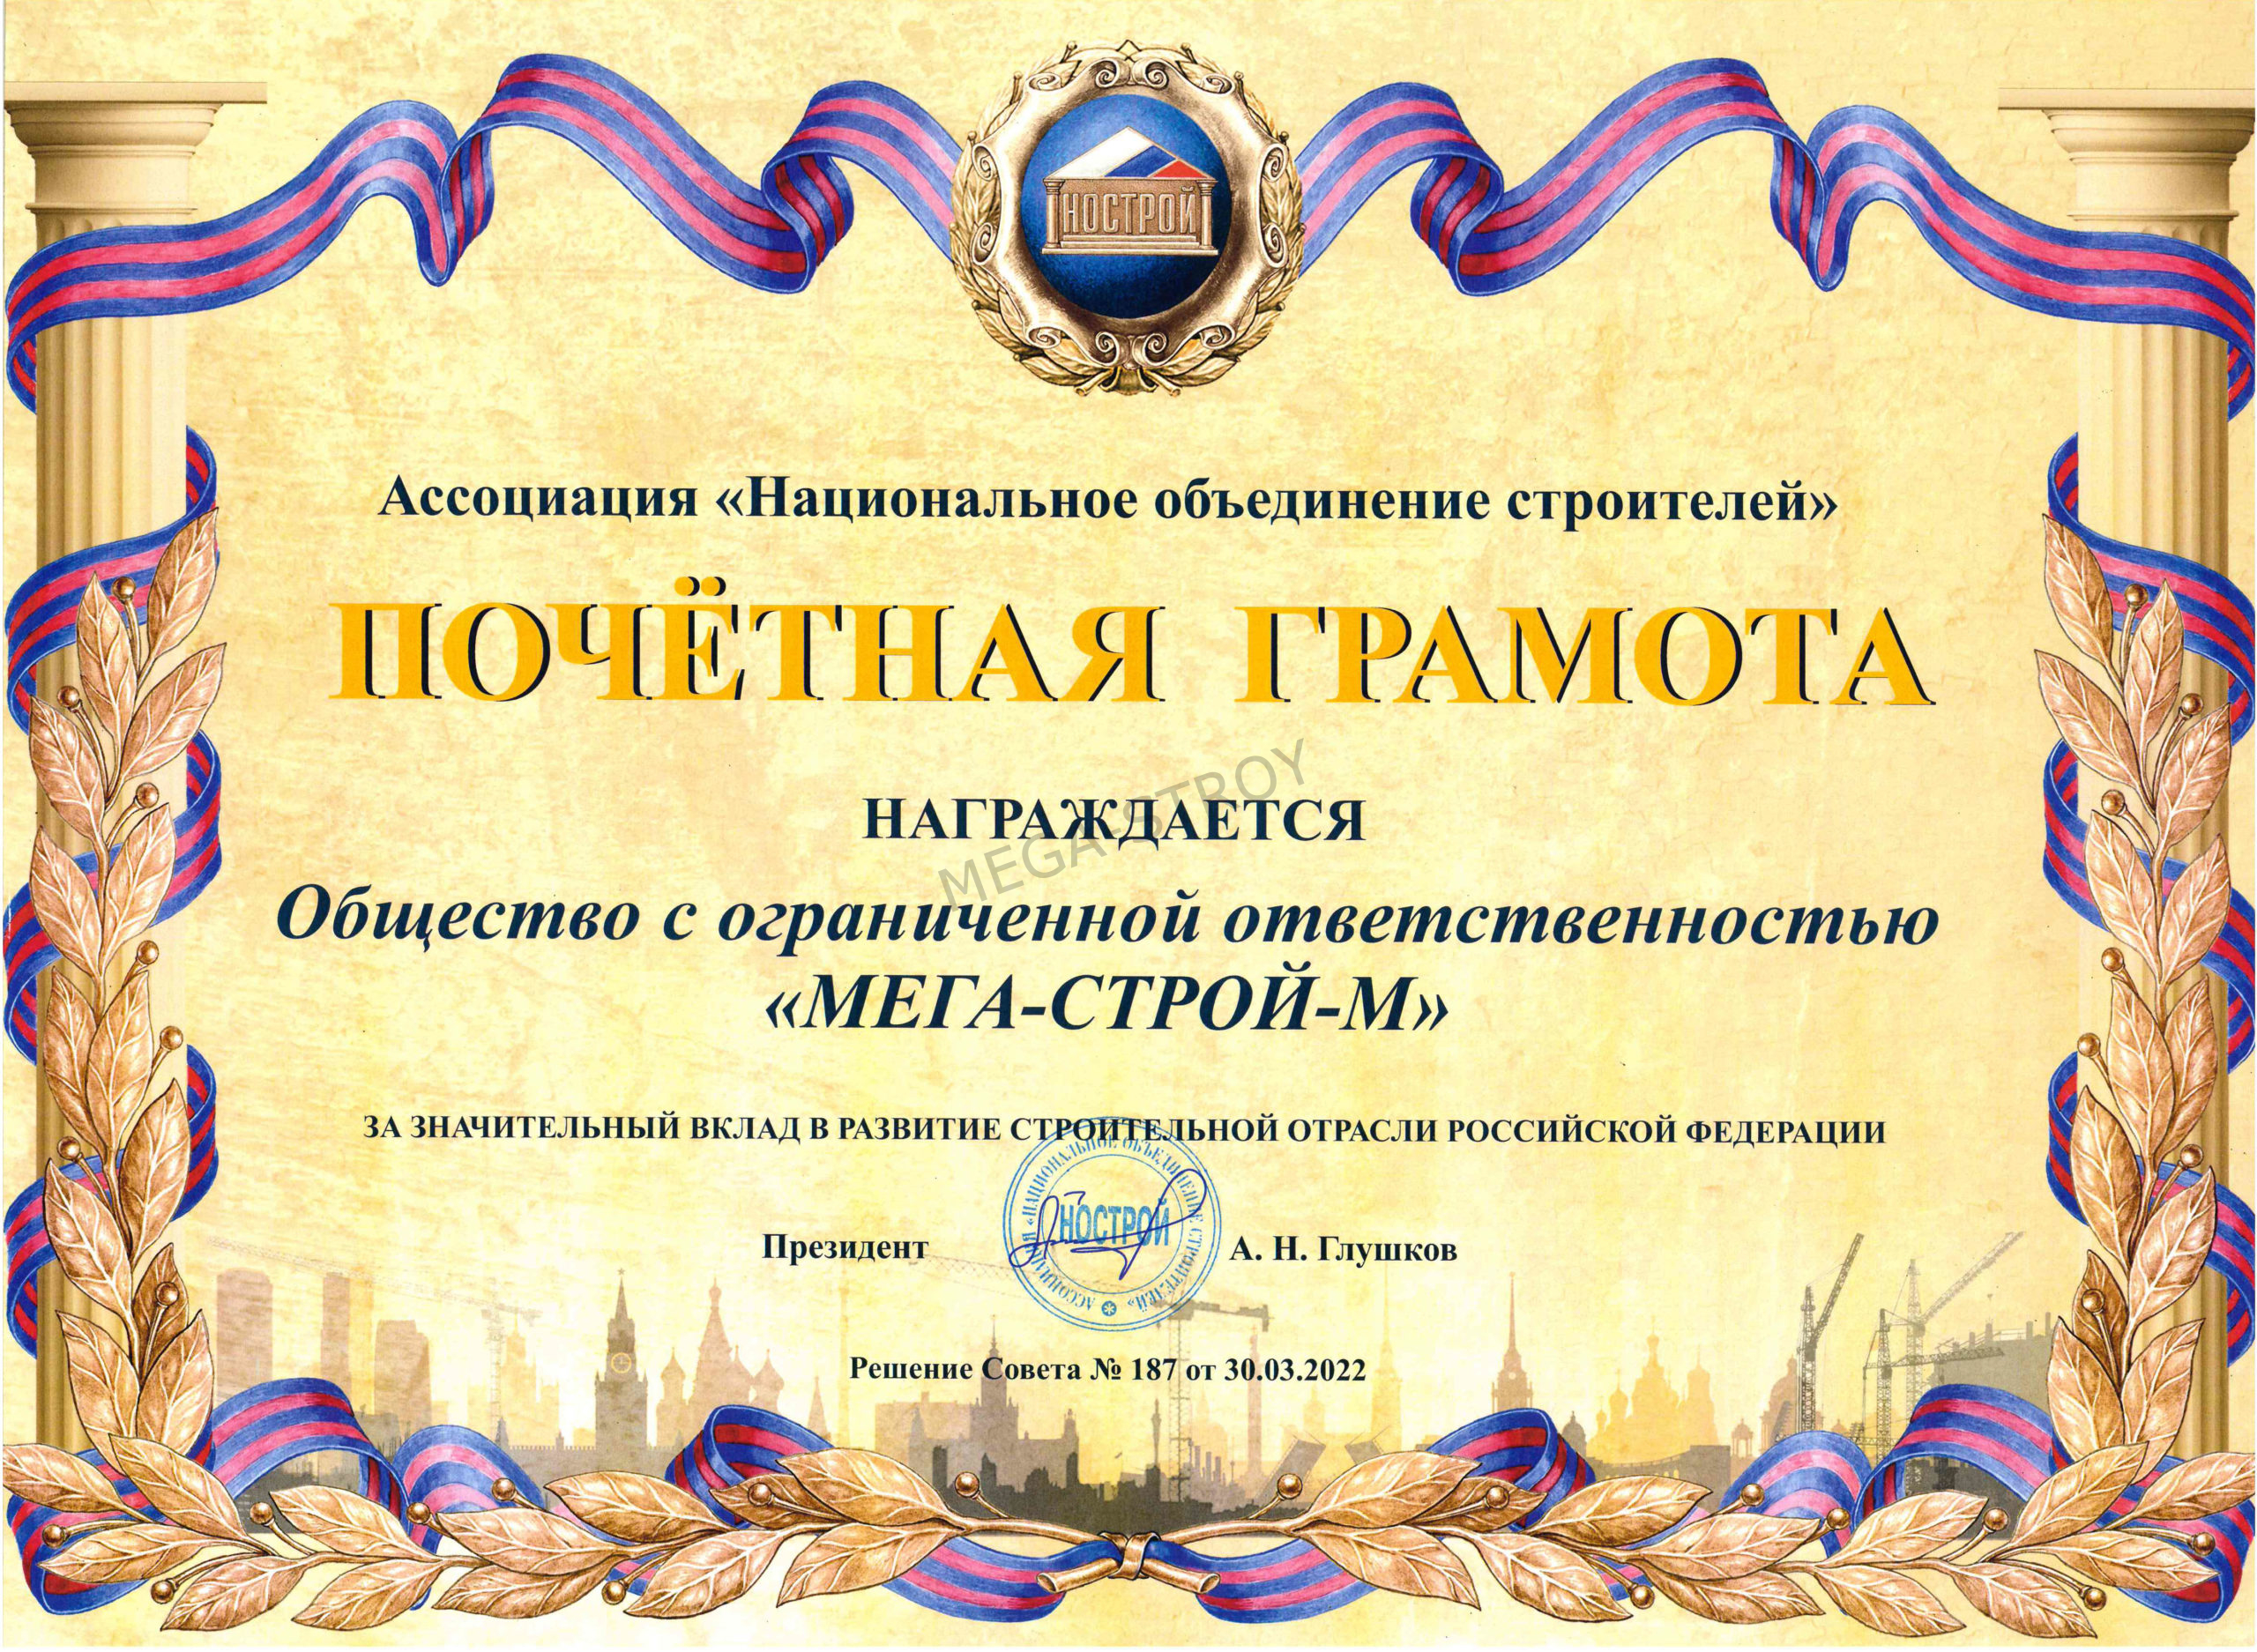 HONORARY LETTER FROM THE  NATIONAL ASSOCIATION OF BUILDERS | МЕГА-СТРОЙ